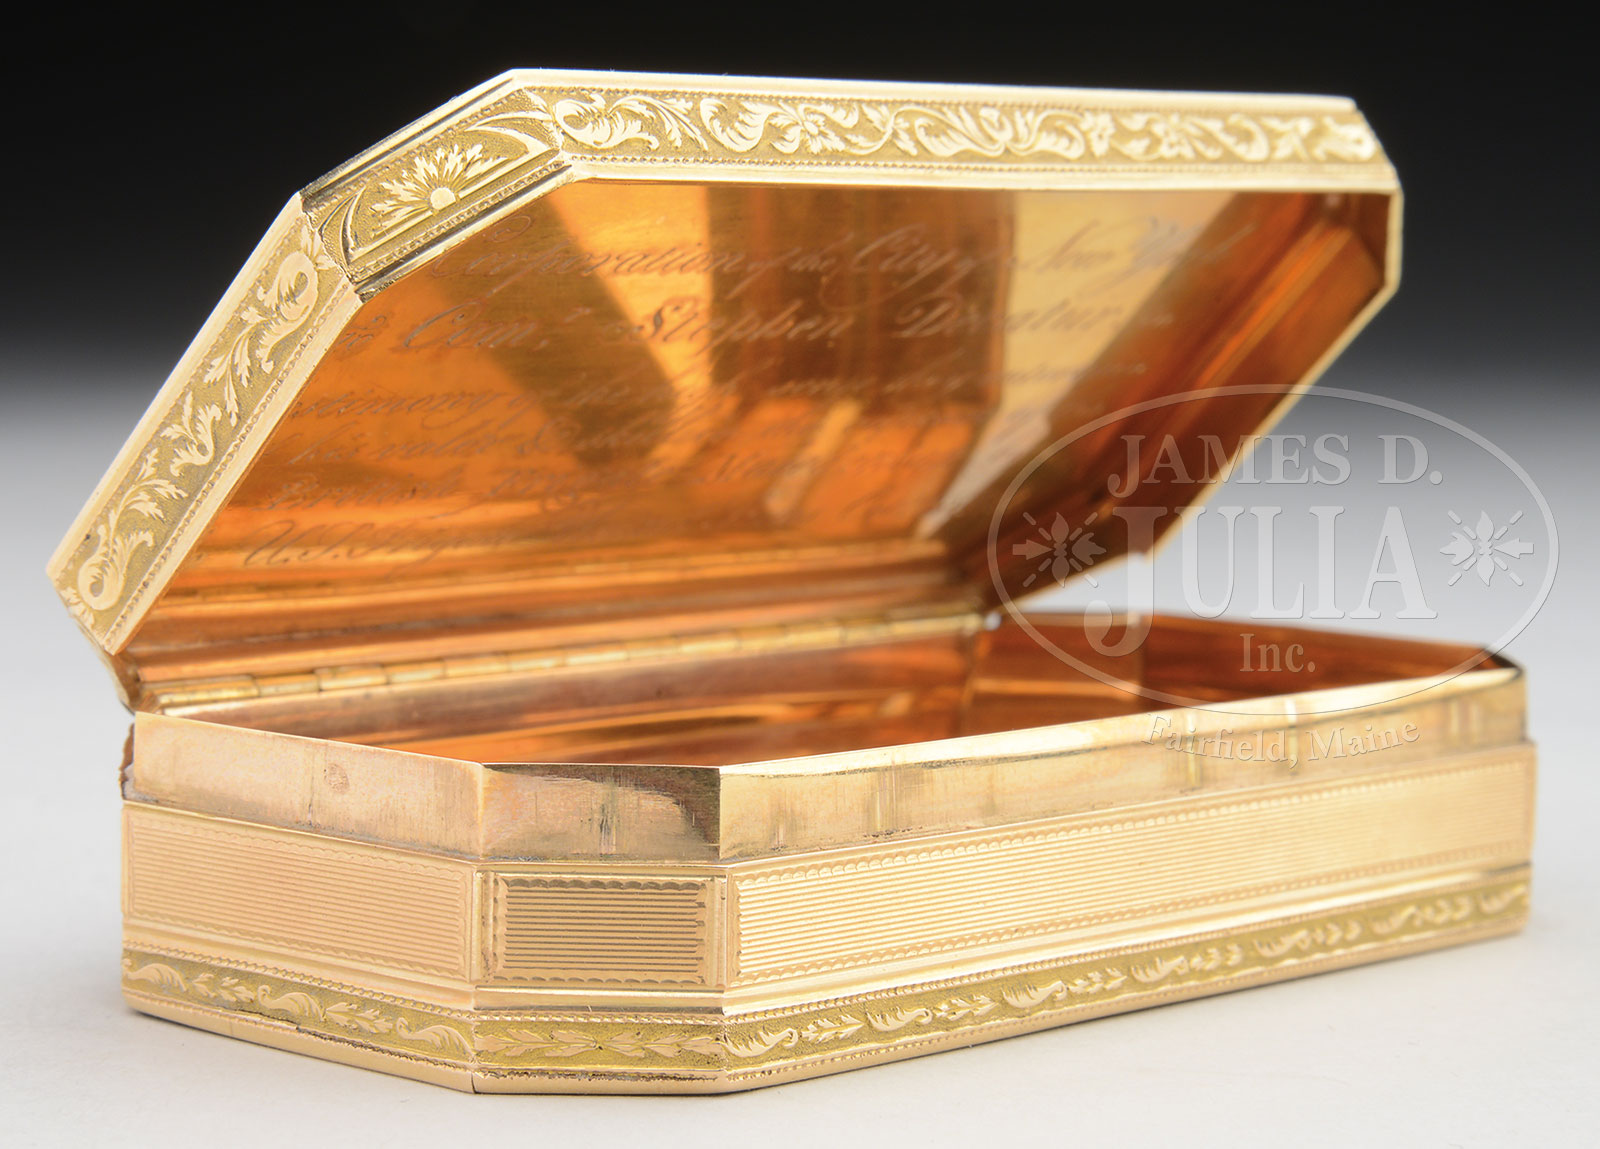 ICONIC AND EXCEEDINGLY RARE GOLD FREEDOM BOX, COMMODORE STEPHEN DECATUR FROM THE CITY OF NEW YORK, 1812.